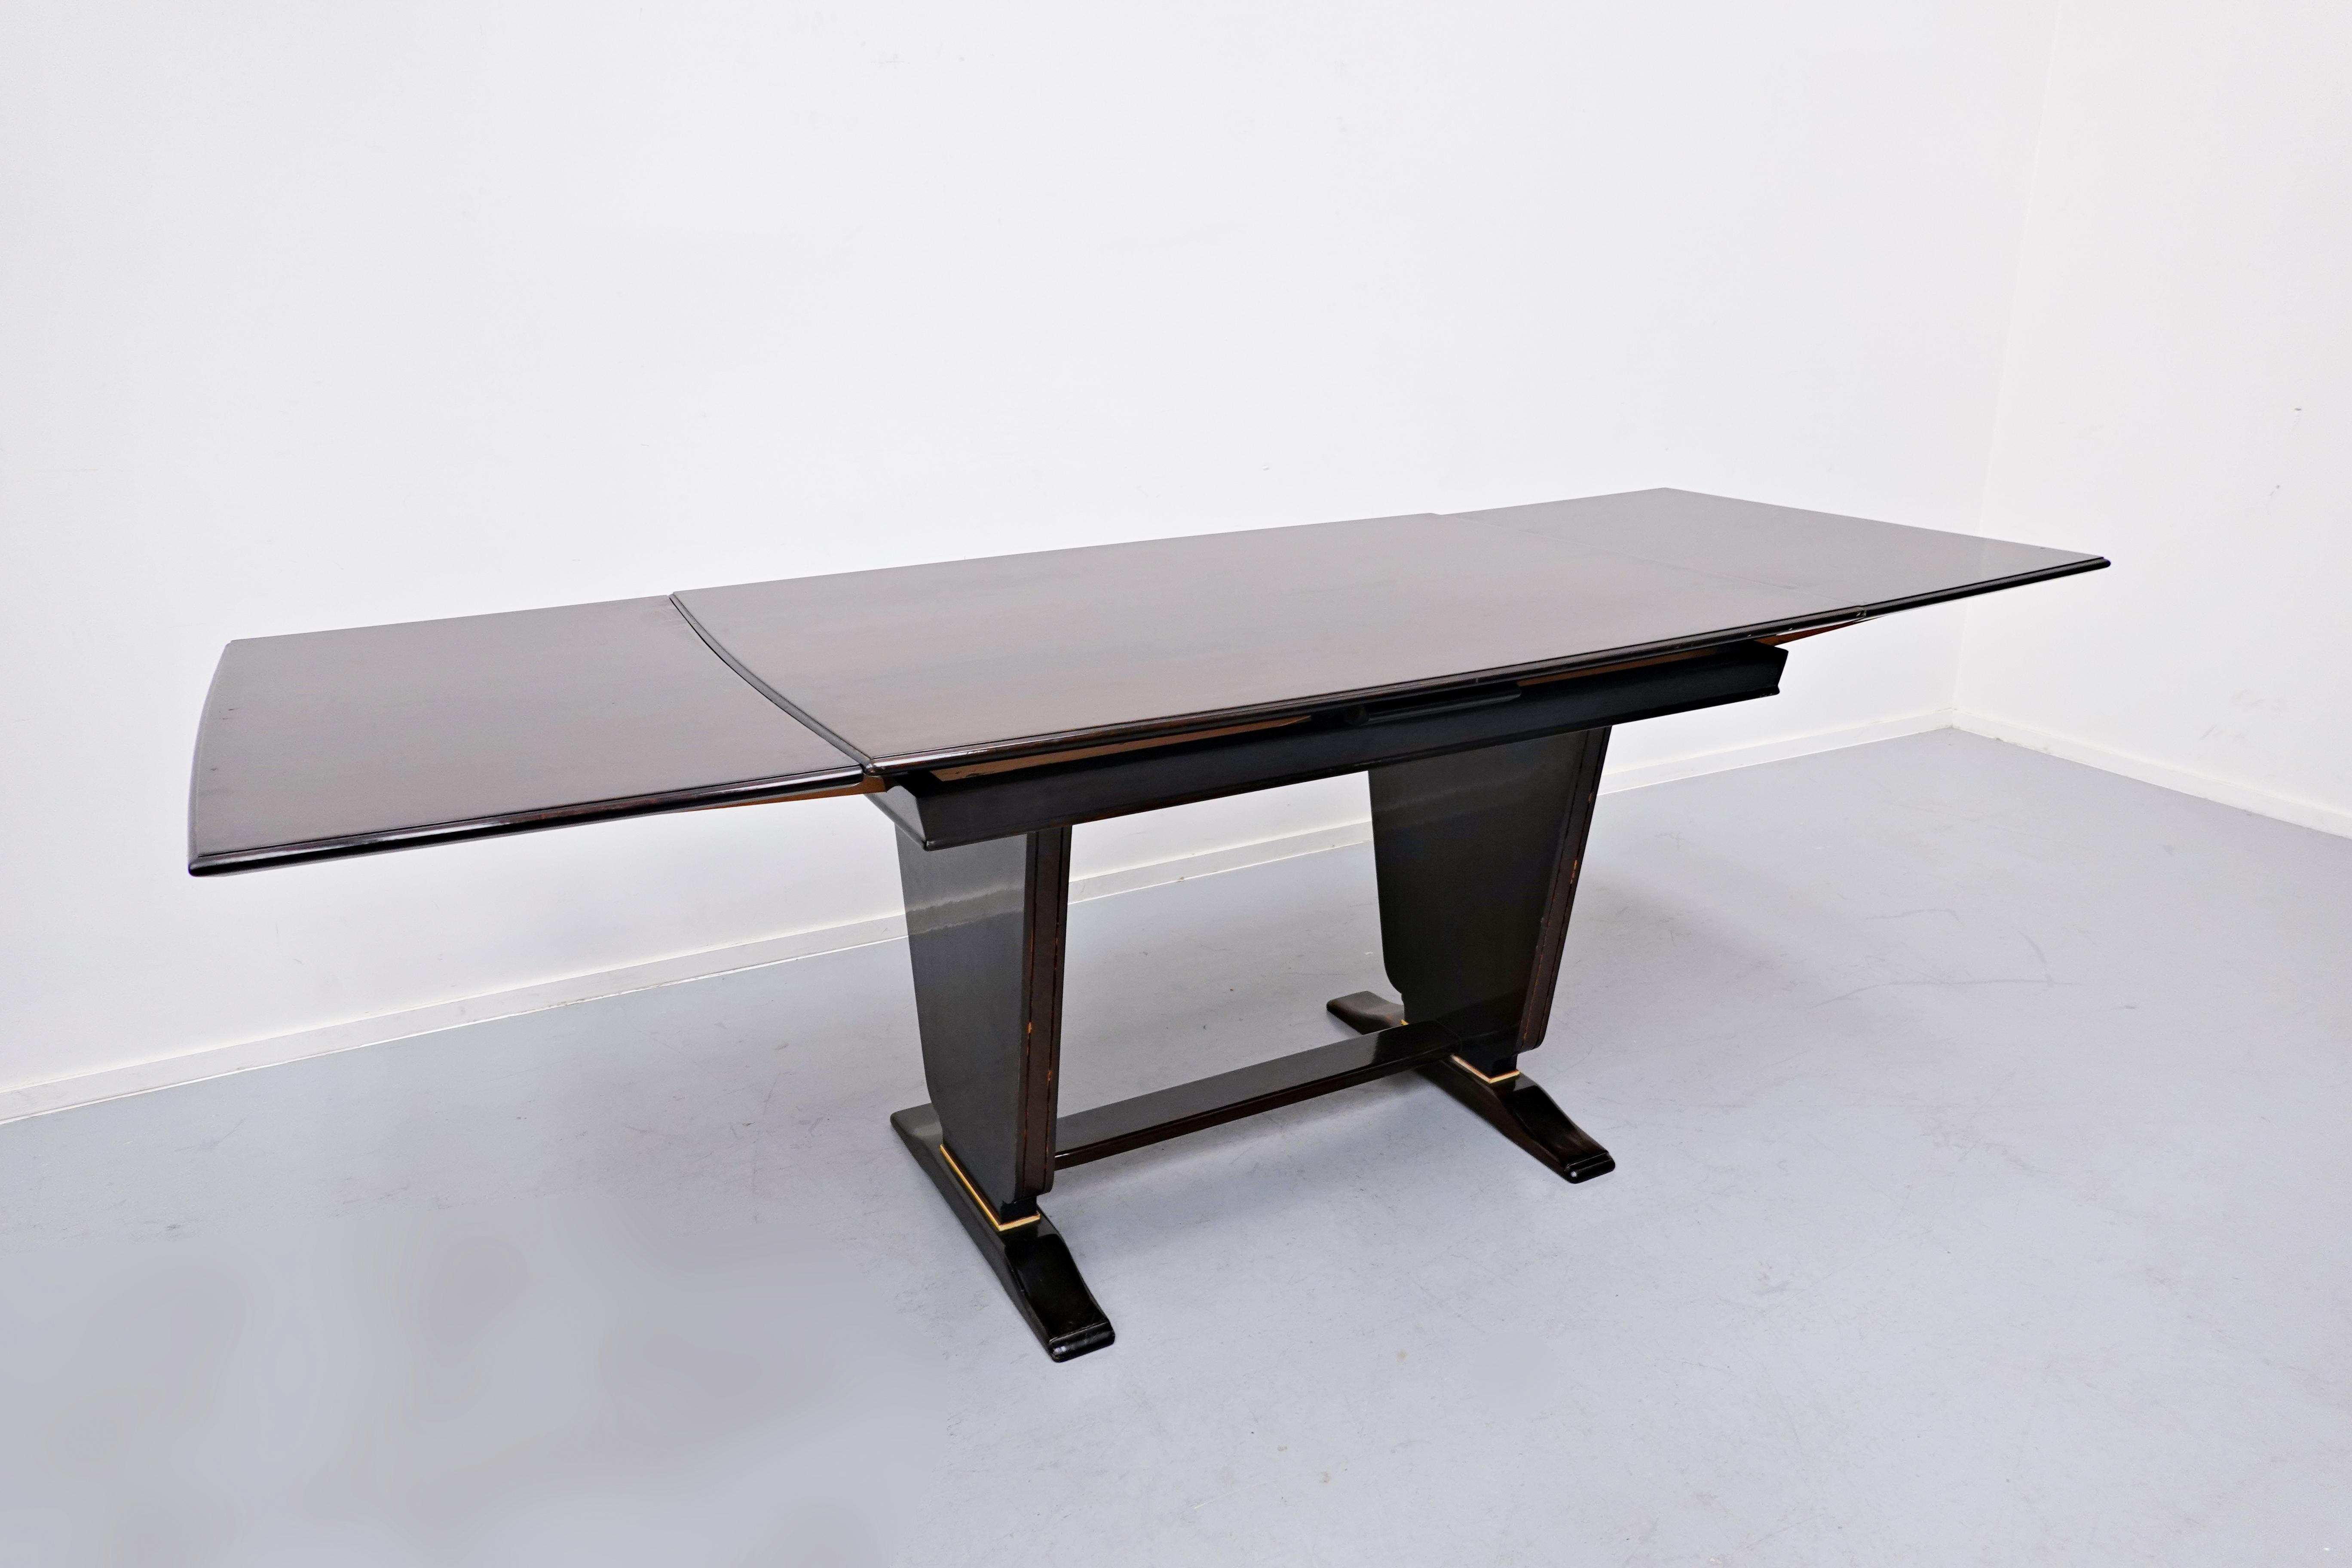 Mid-Century Modern Vittorio Dassi extendable dining table - Italy 1950s
Measures: W 120 to 213 cm.